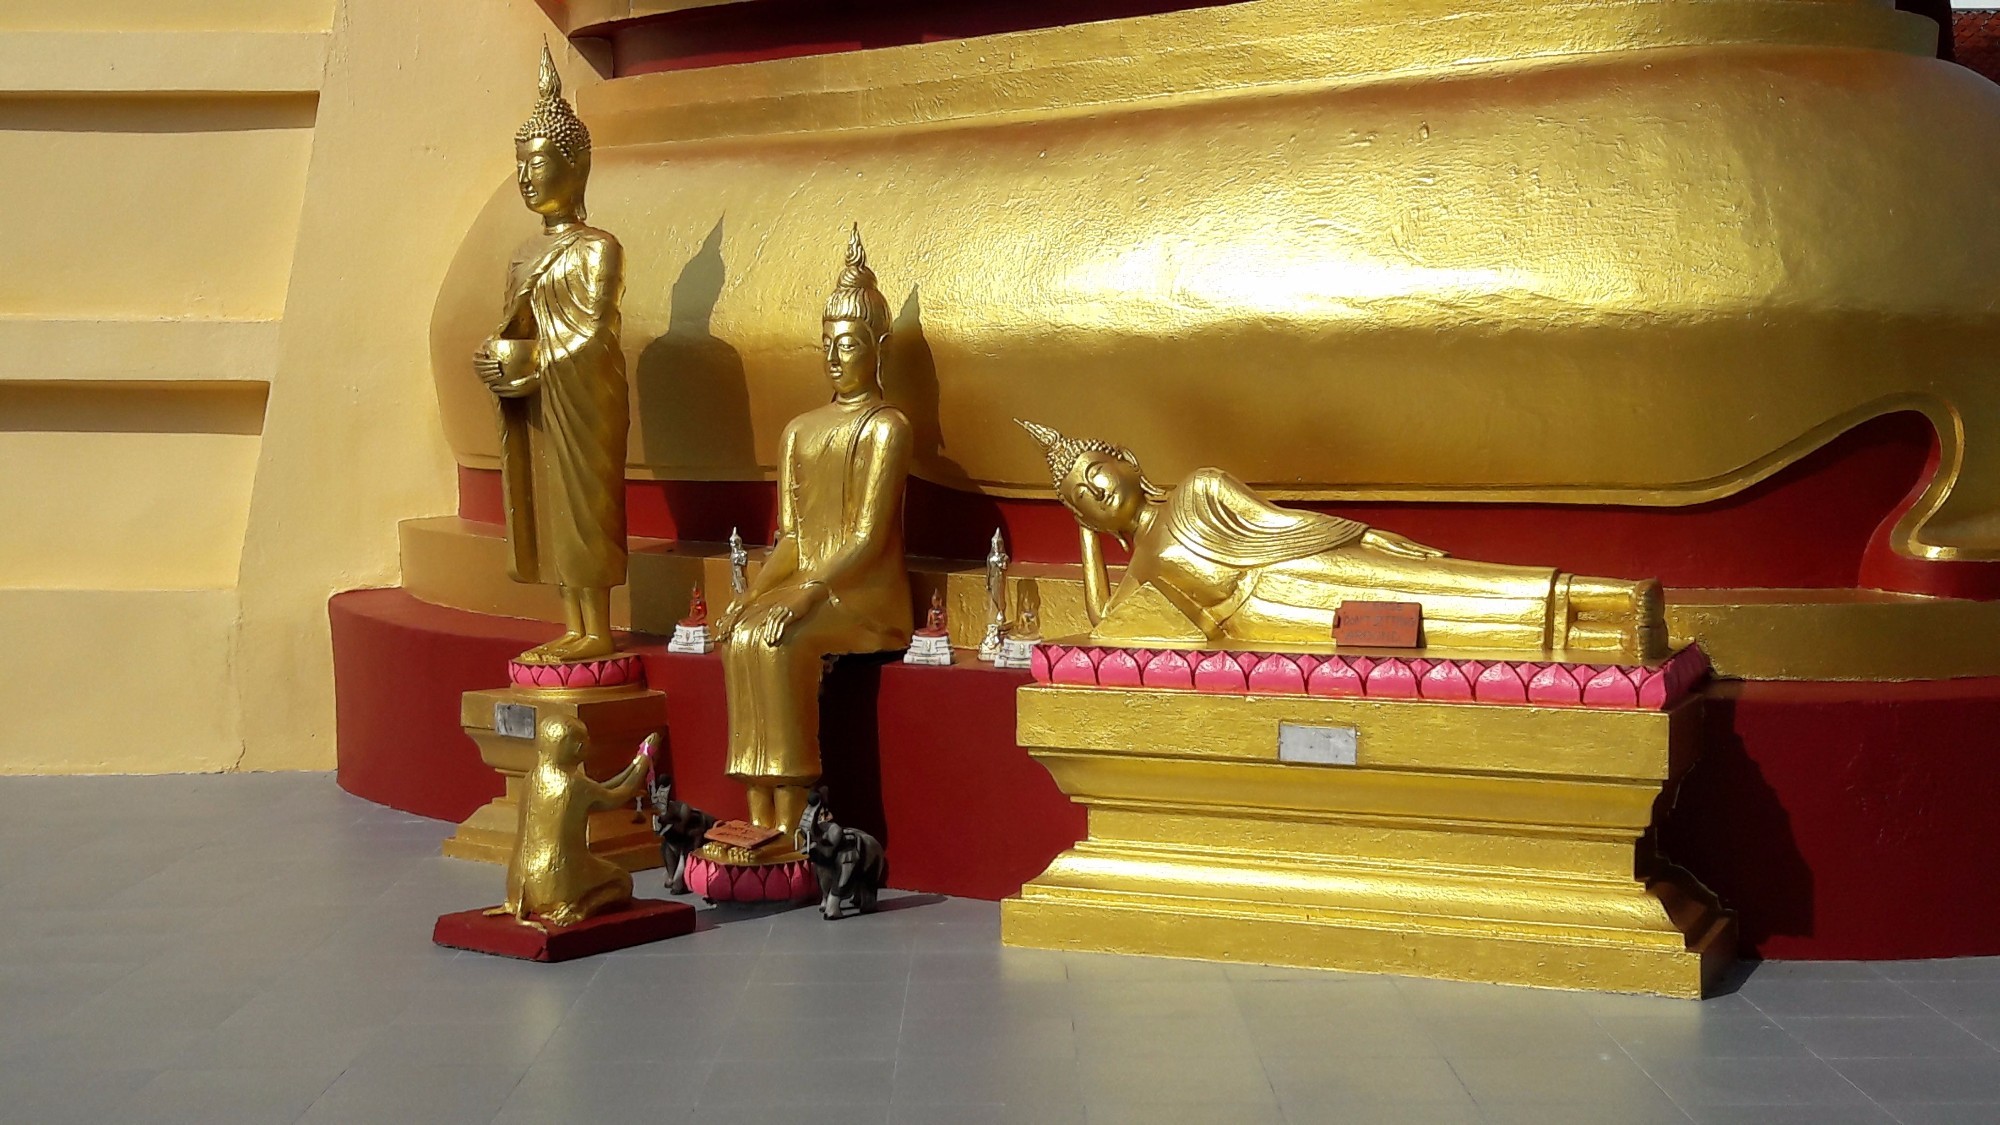 Statue of Golden Buddha — you can go there with a tour or by motorbike yorself.